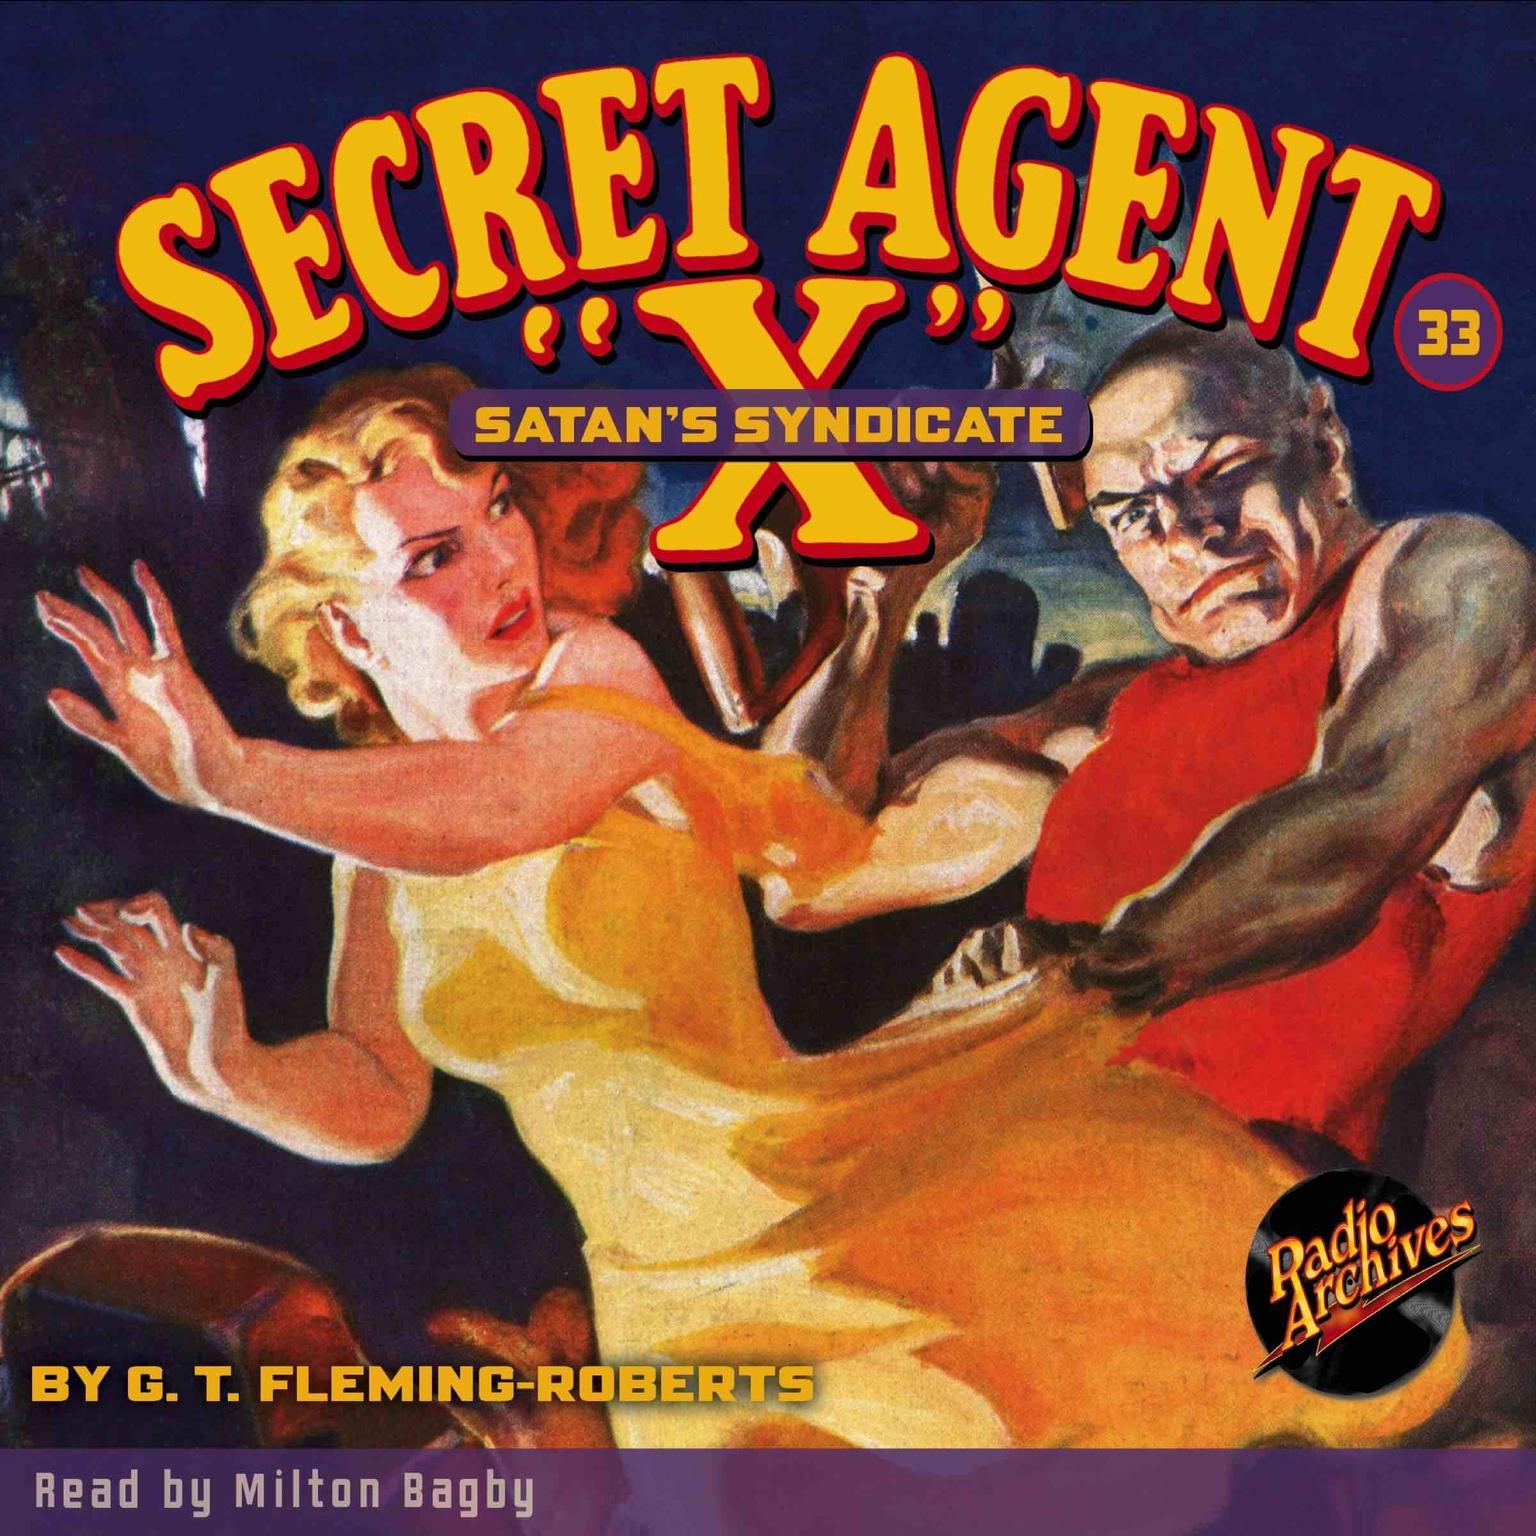 Secret Agent X: Satan’s Syndicate Audiobook, by G. T. Fleming-Roberts